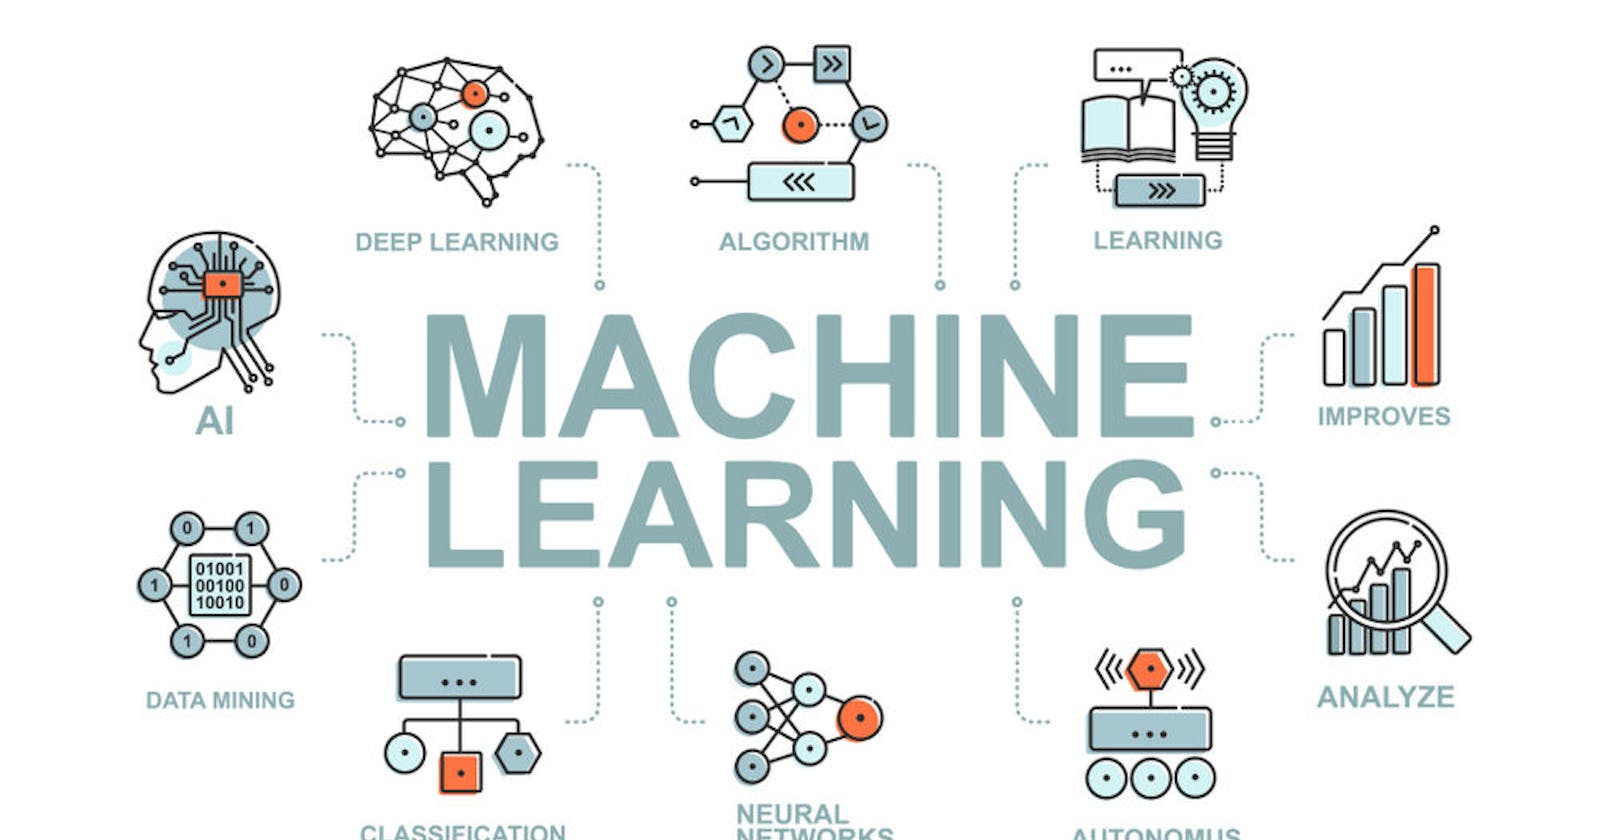 Hands on Machine Learning with a Practical Approach